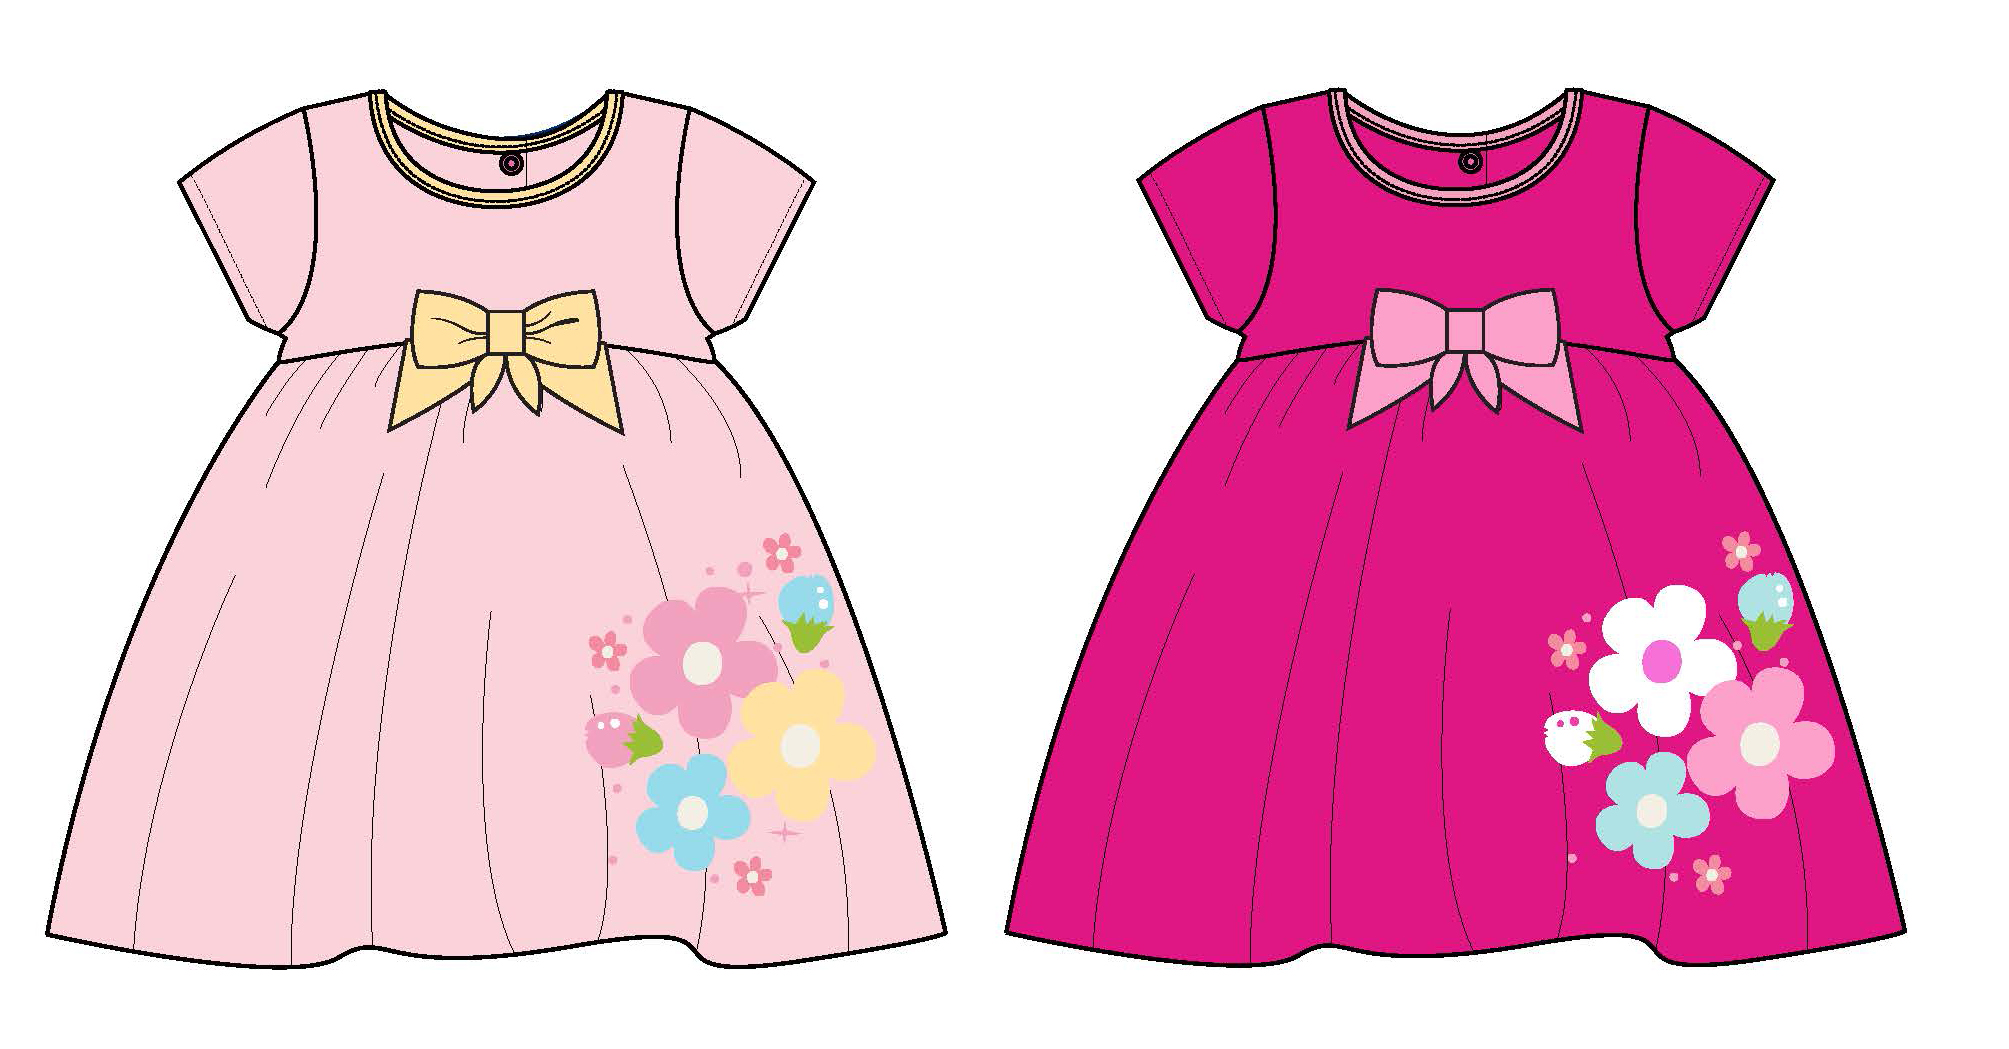 Baby Girl's Short-Sleeve Knit DRESS w/ Ribbon Bow Embellishment - Floral Print - Size 0/3M-9M